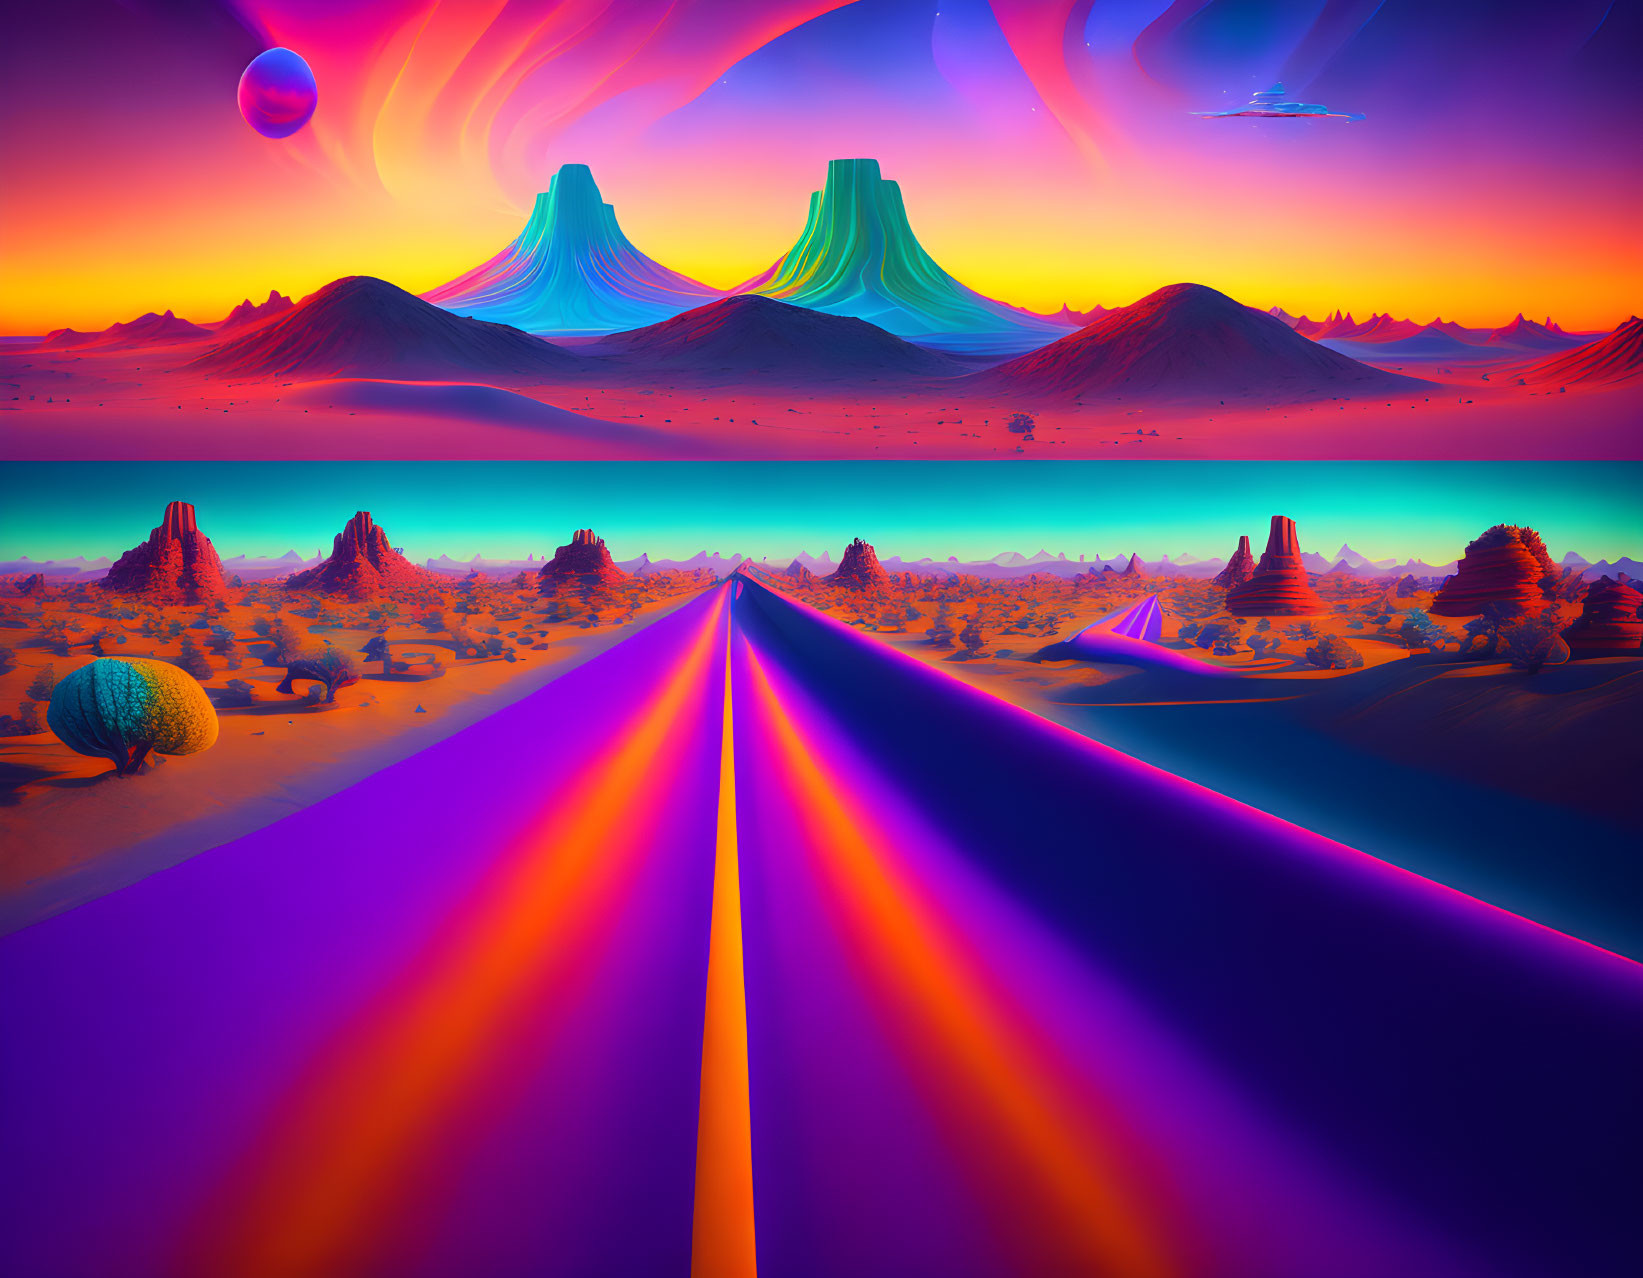 Colorful alien landscape: purple road, twin mountains, psychedelic sky, moon, flying saucer